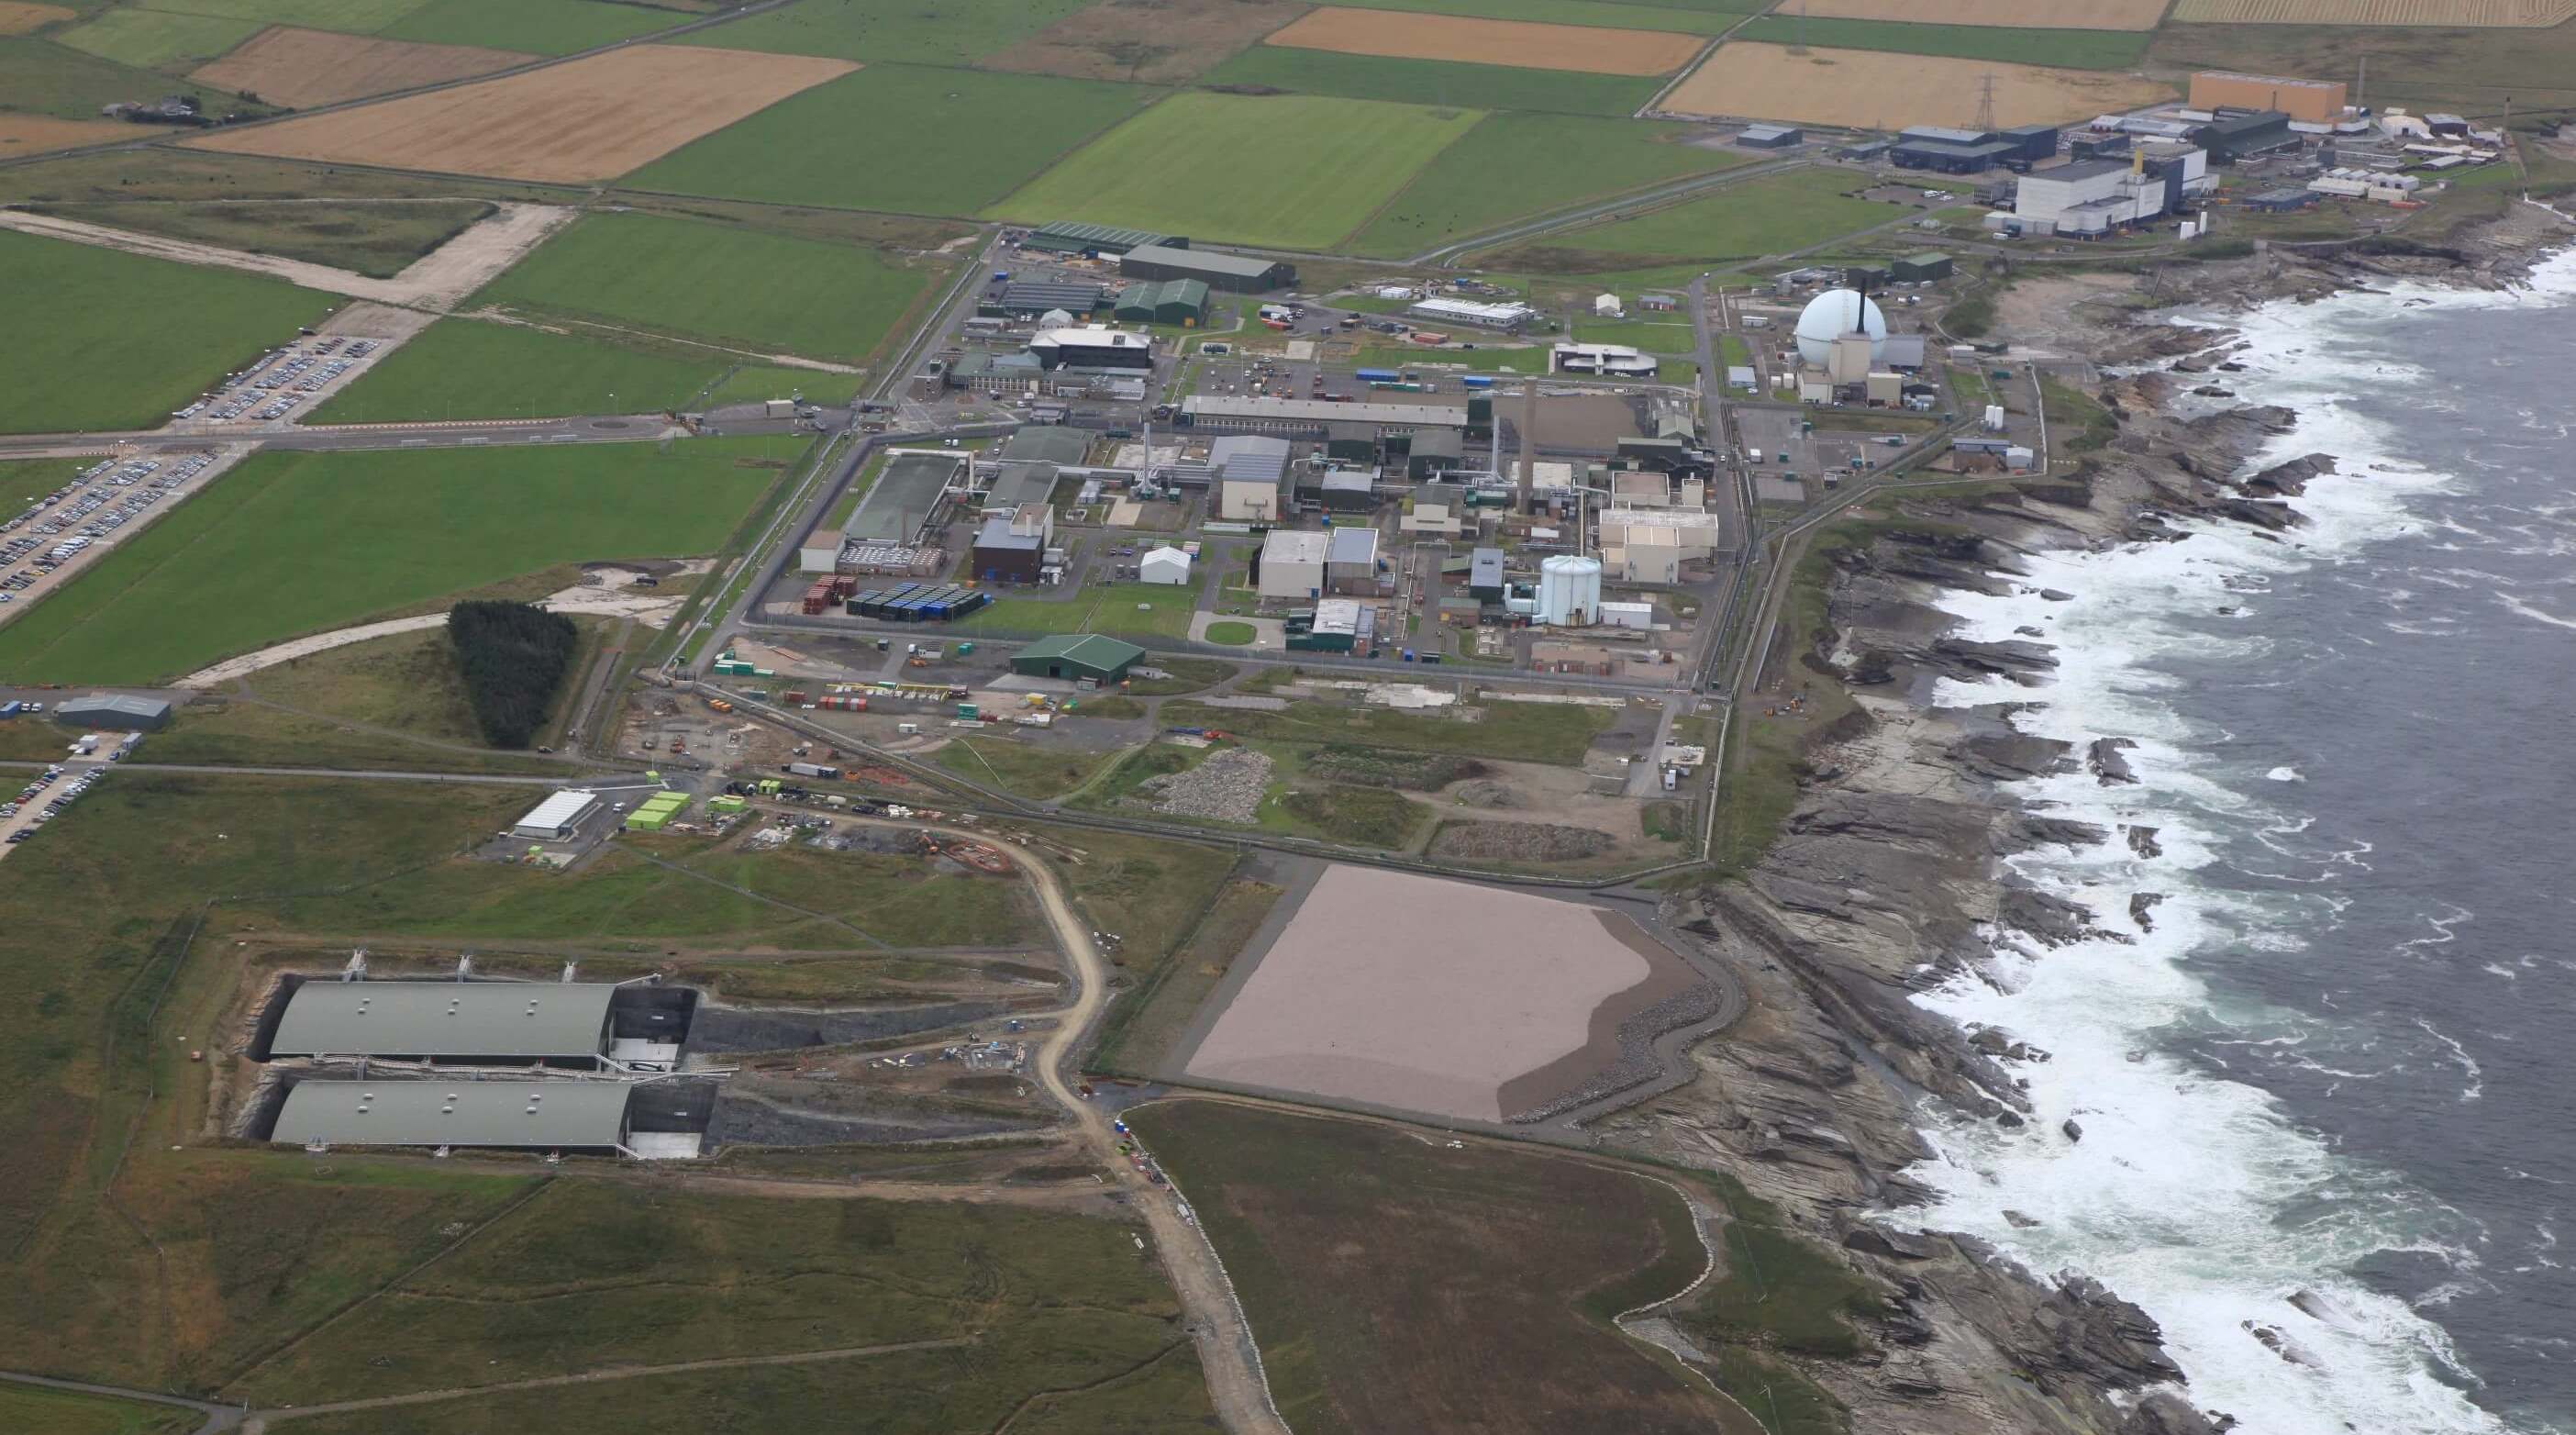 Dounreay aerial view of the site. Picture courtesy of Graham Group.